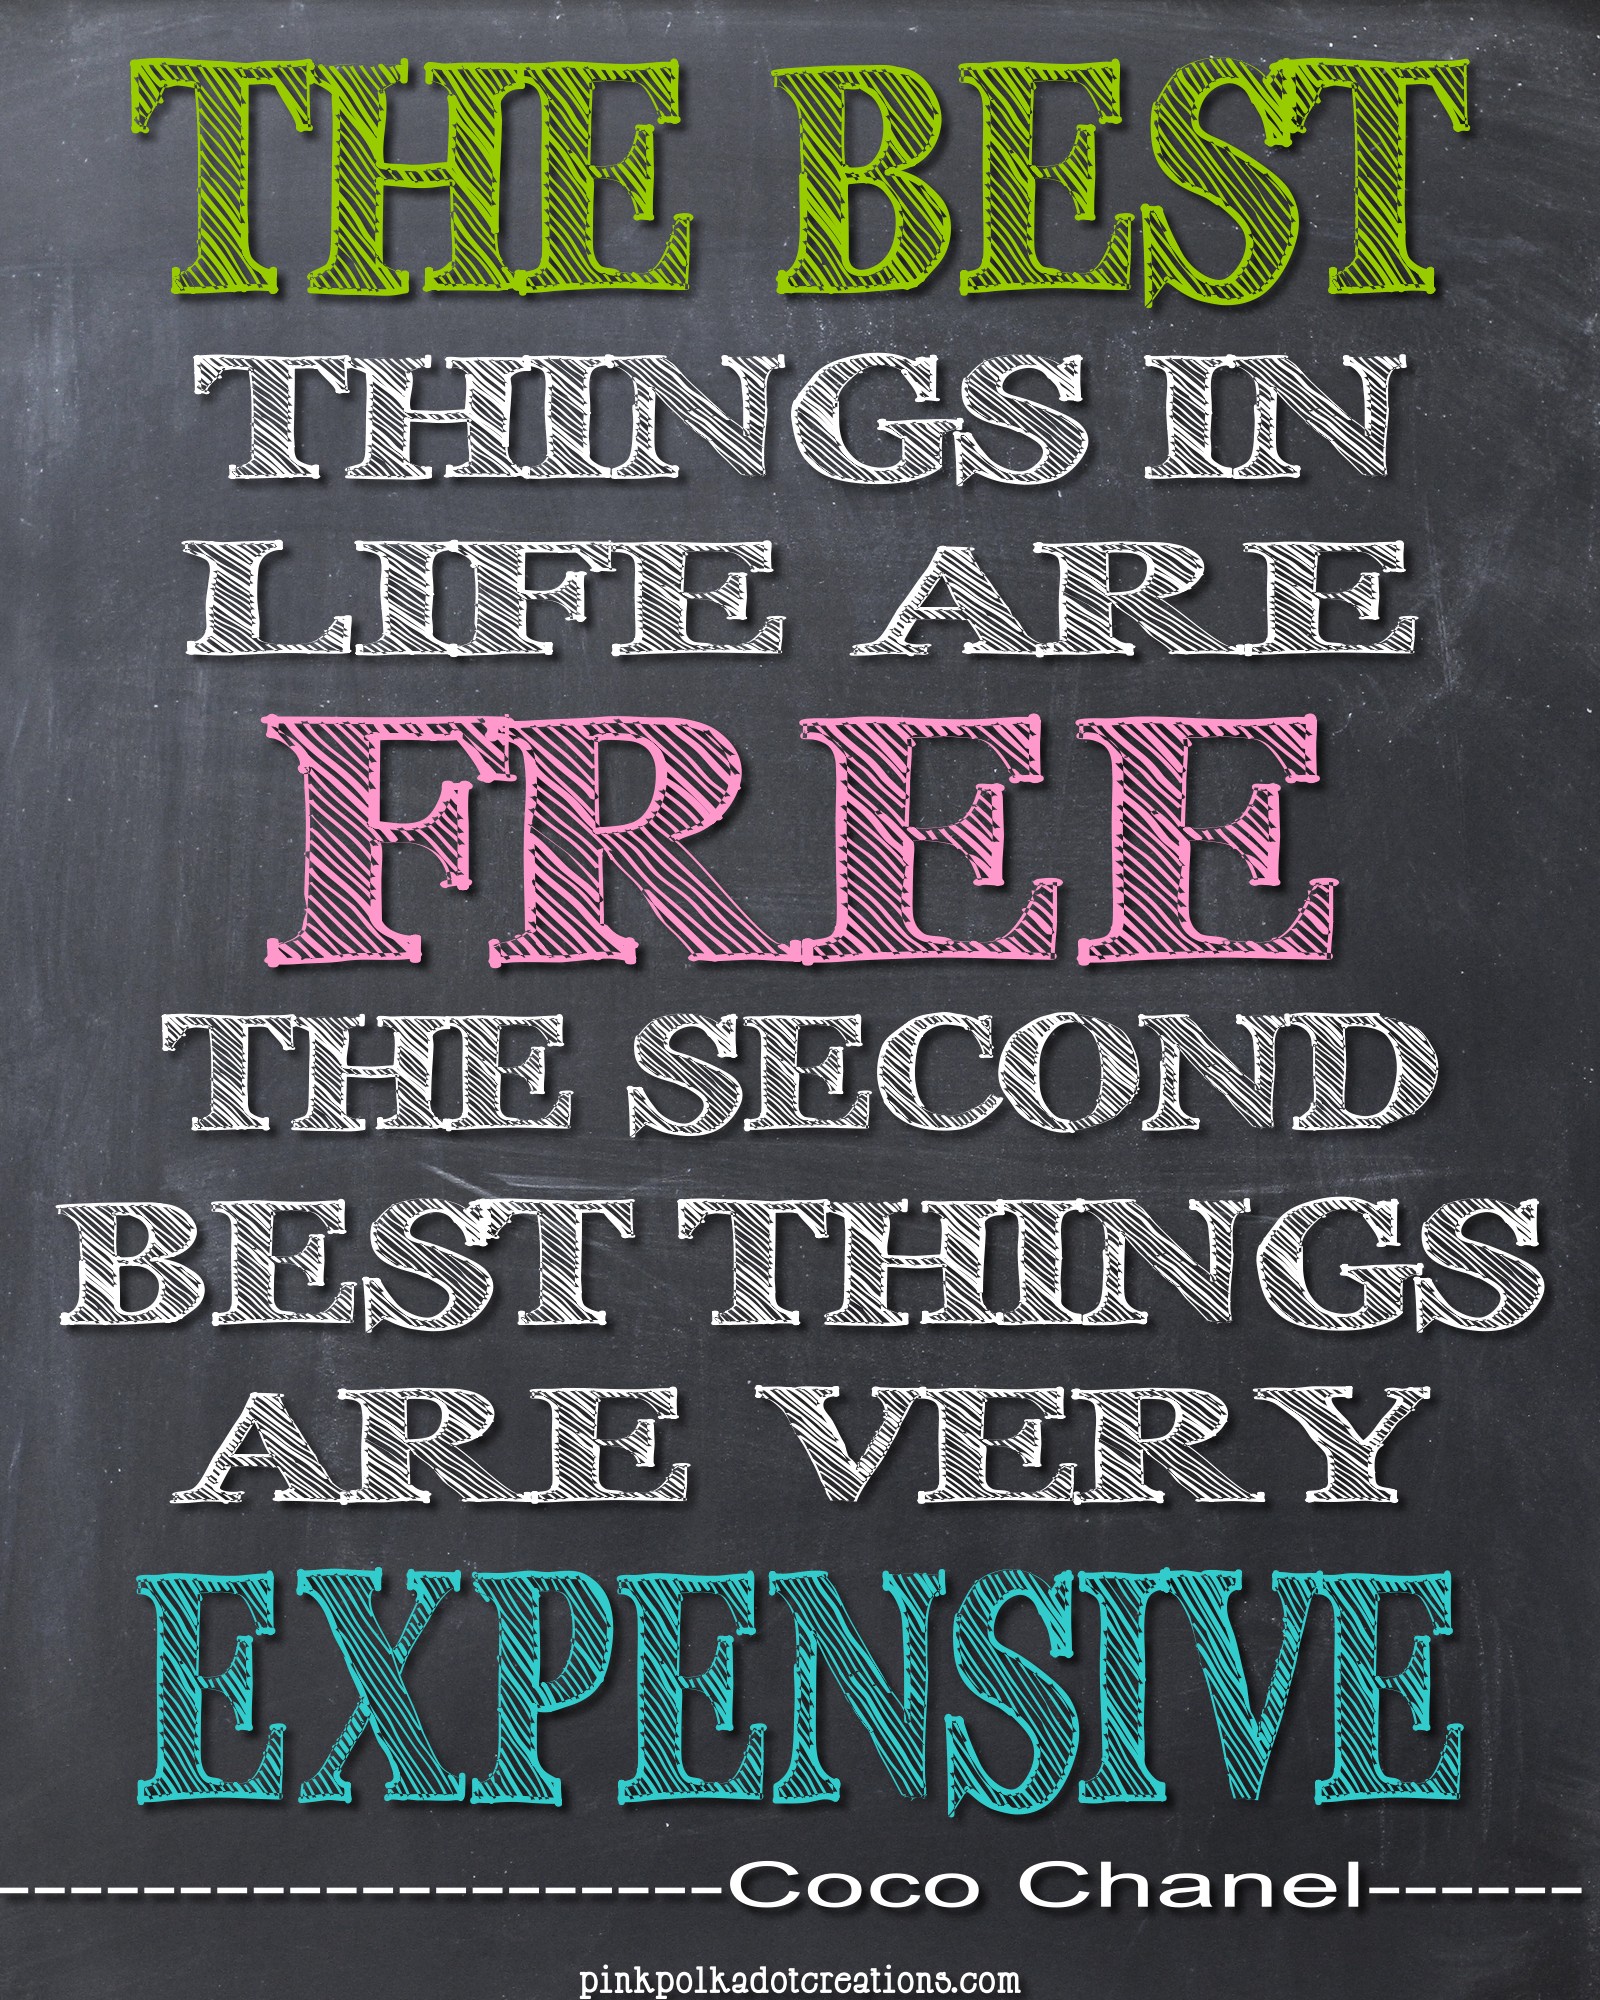 Coco Chanel Quote the Best Things in Life Are Free the Second 